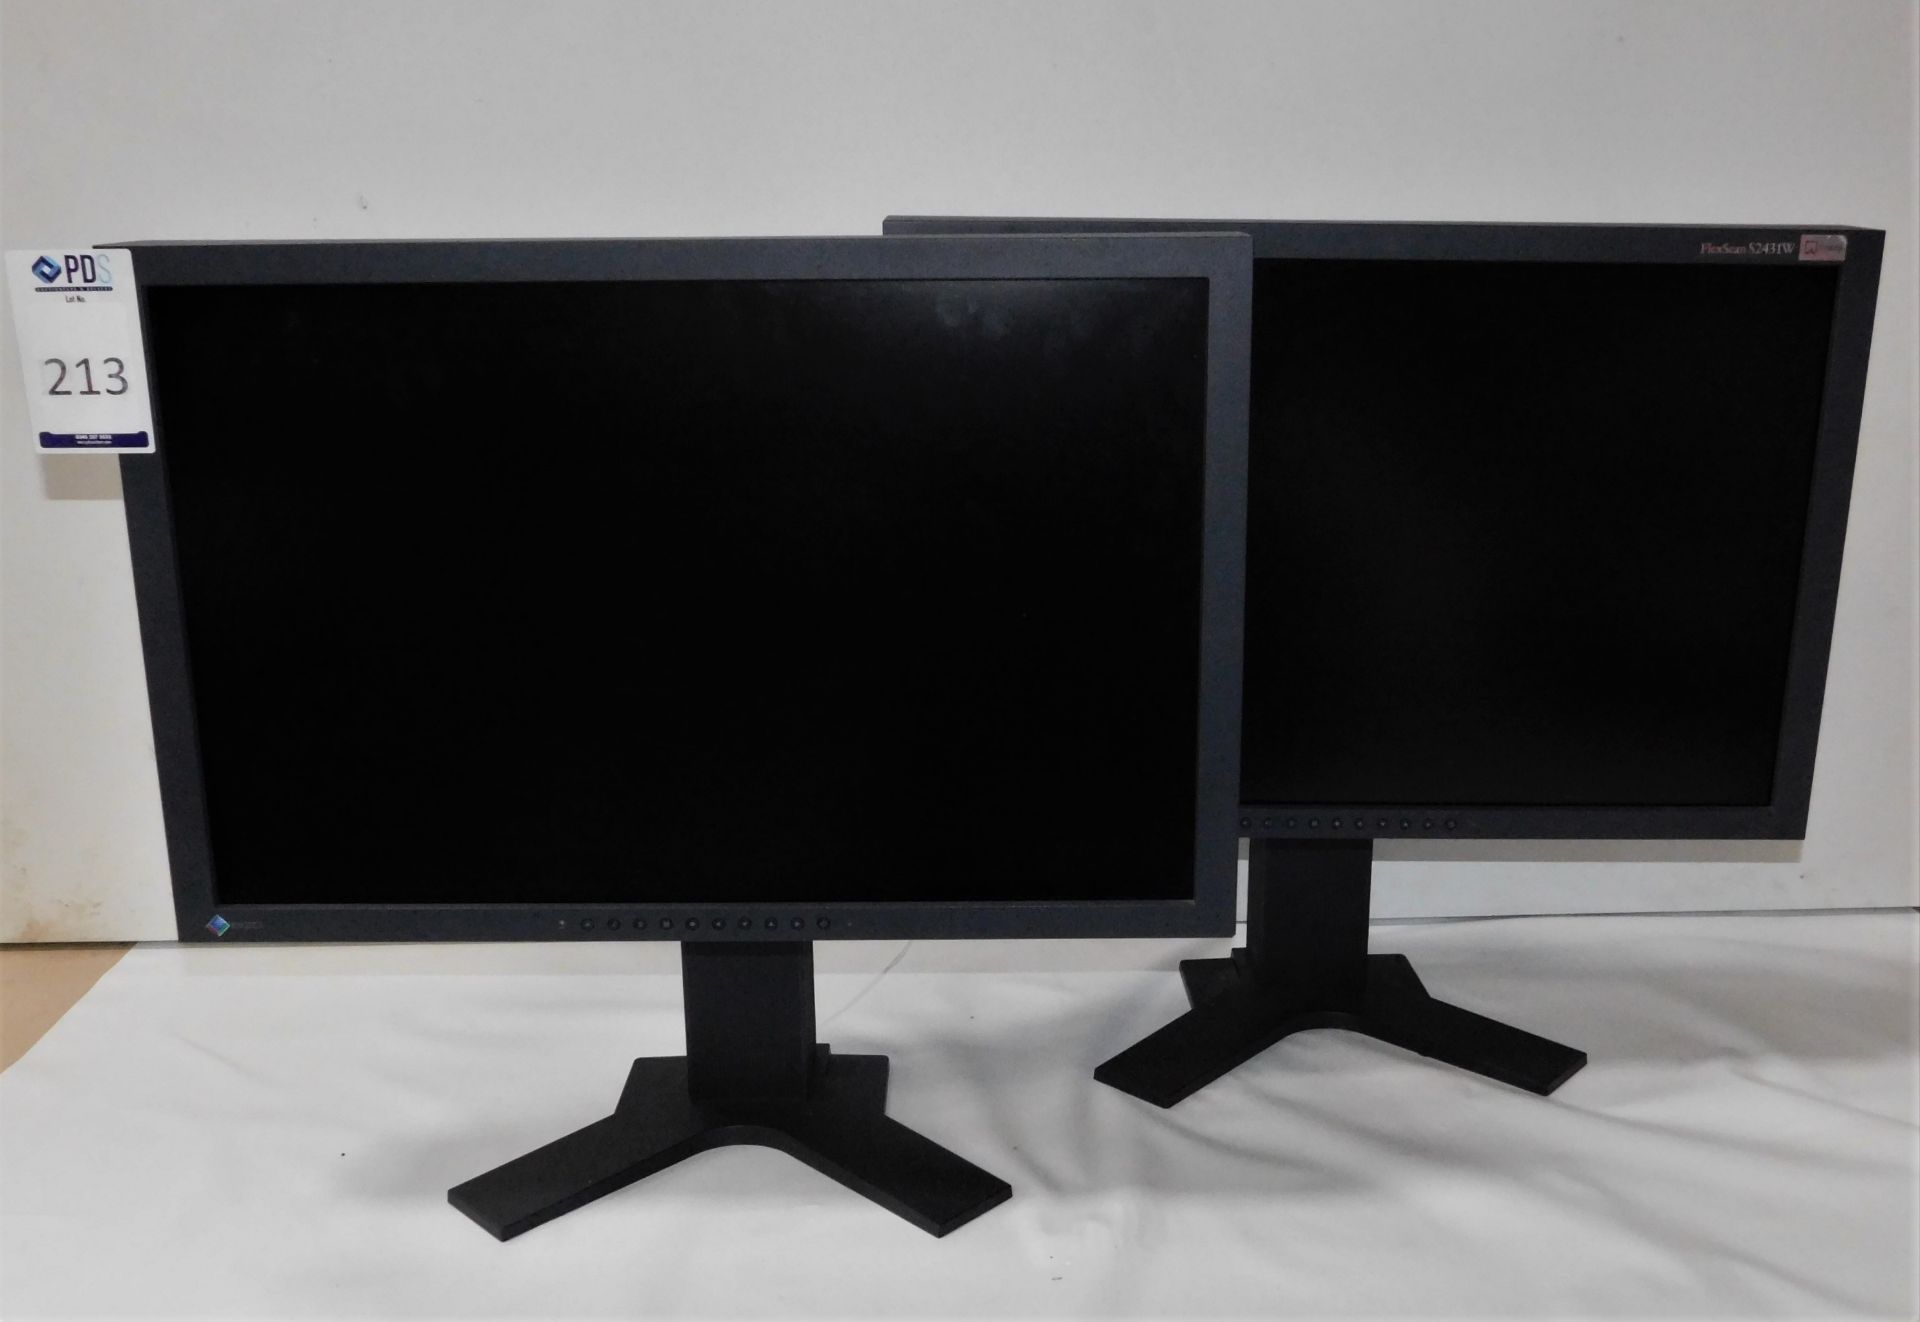 EIZO FlexScan S2433W 24" Monitor & EIZO FlexScan S2431W 24" Monitor (Location Brentwood. Please